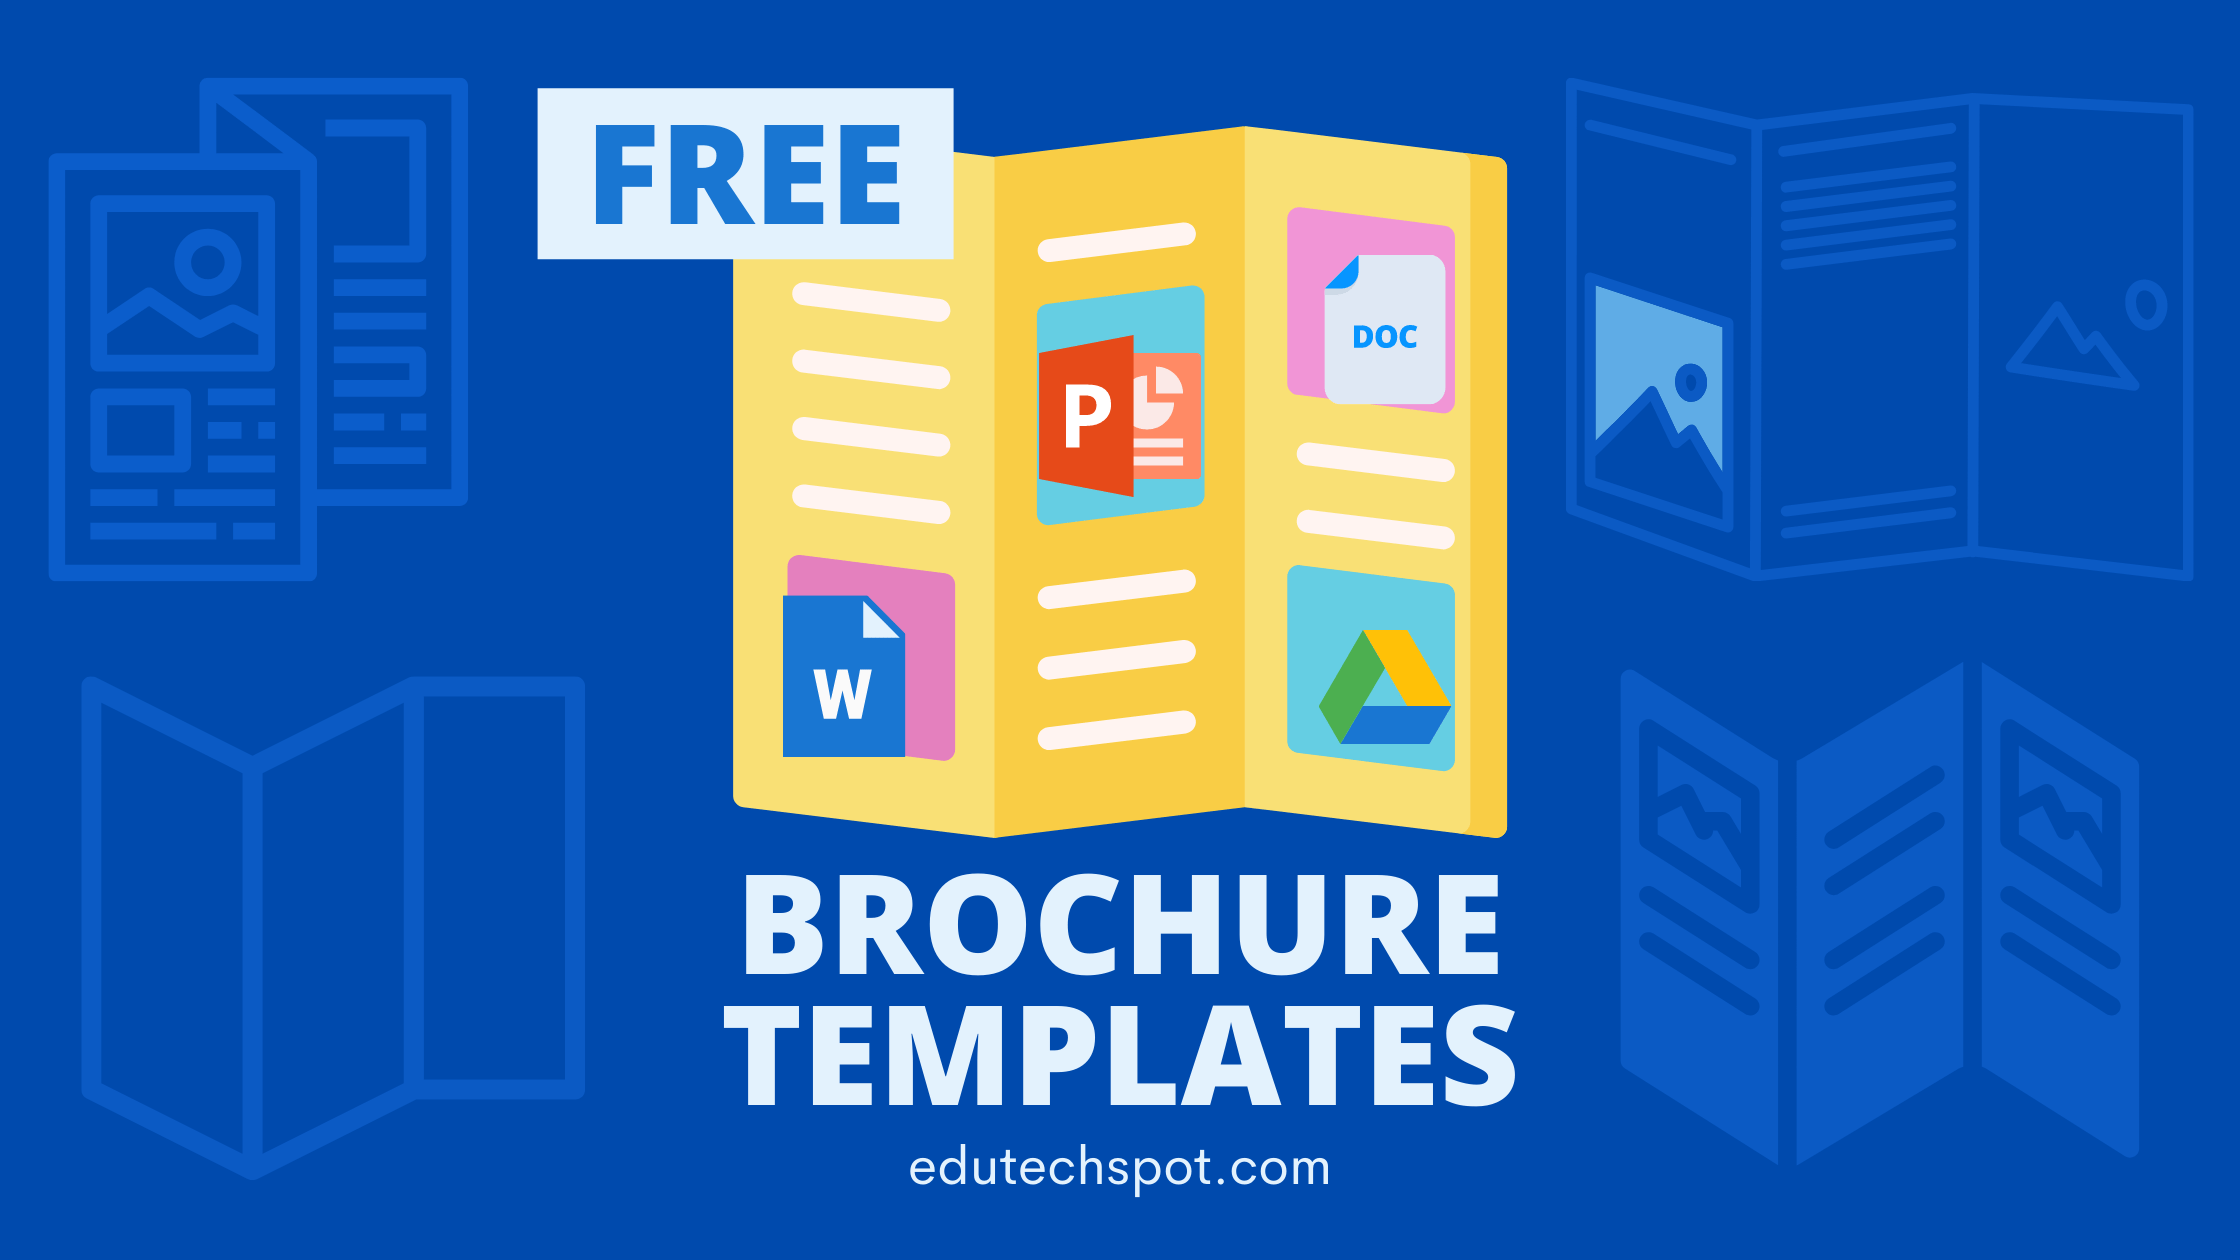 Brochure Template for google docs, Words, Power Point, Slides [ FREE ] With Regard To Travel Brochure Template Google Docs